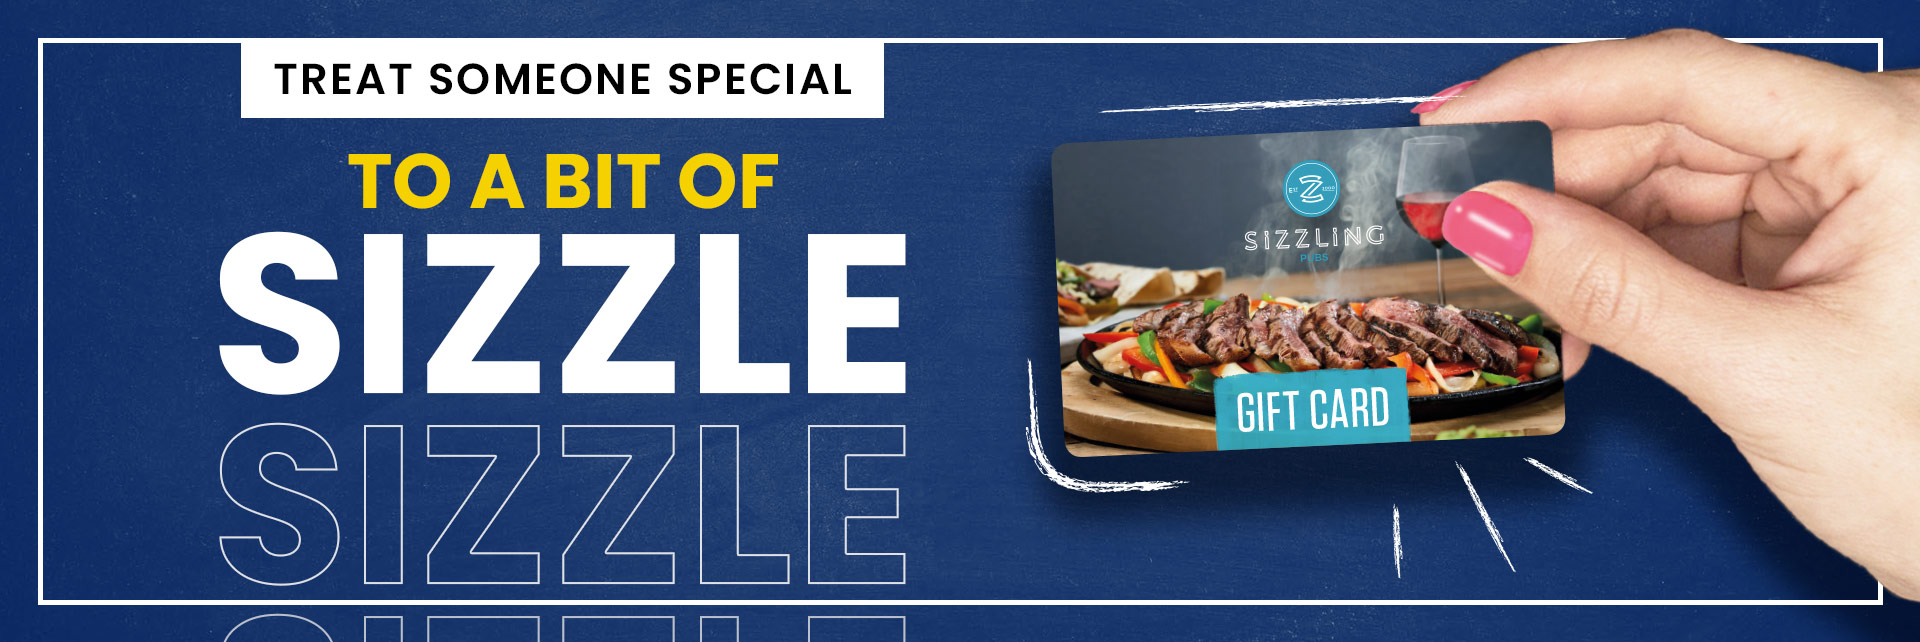 Sizzling Pubs Gift Card at The Grosvenor in Cleethorpes